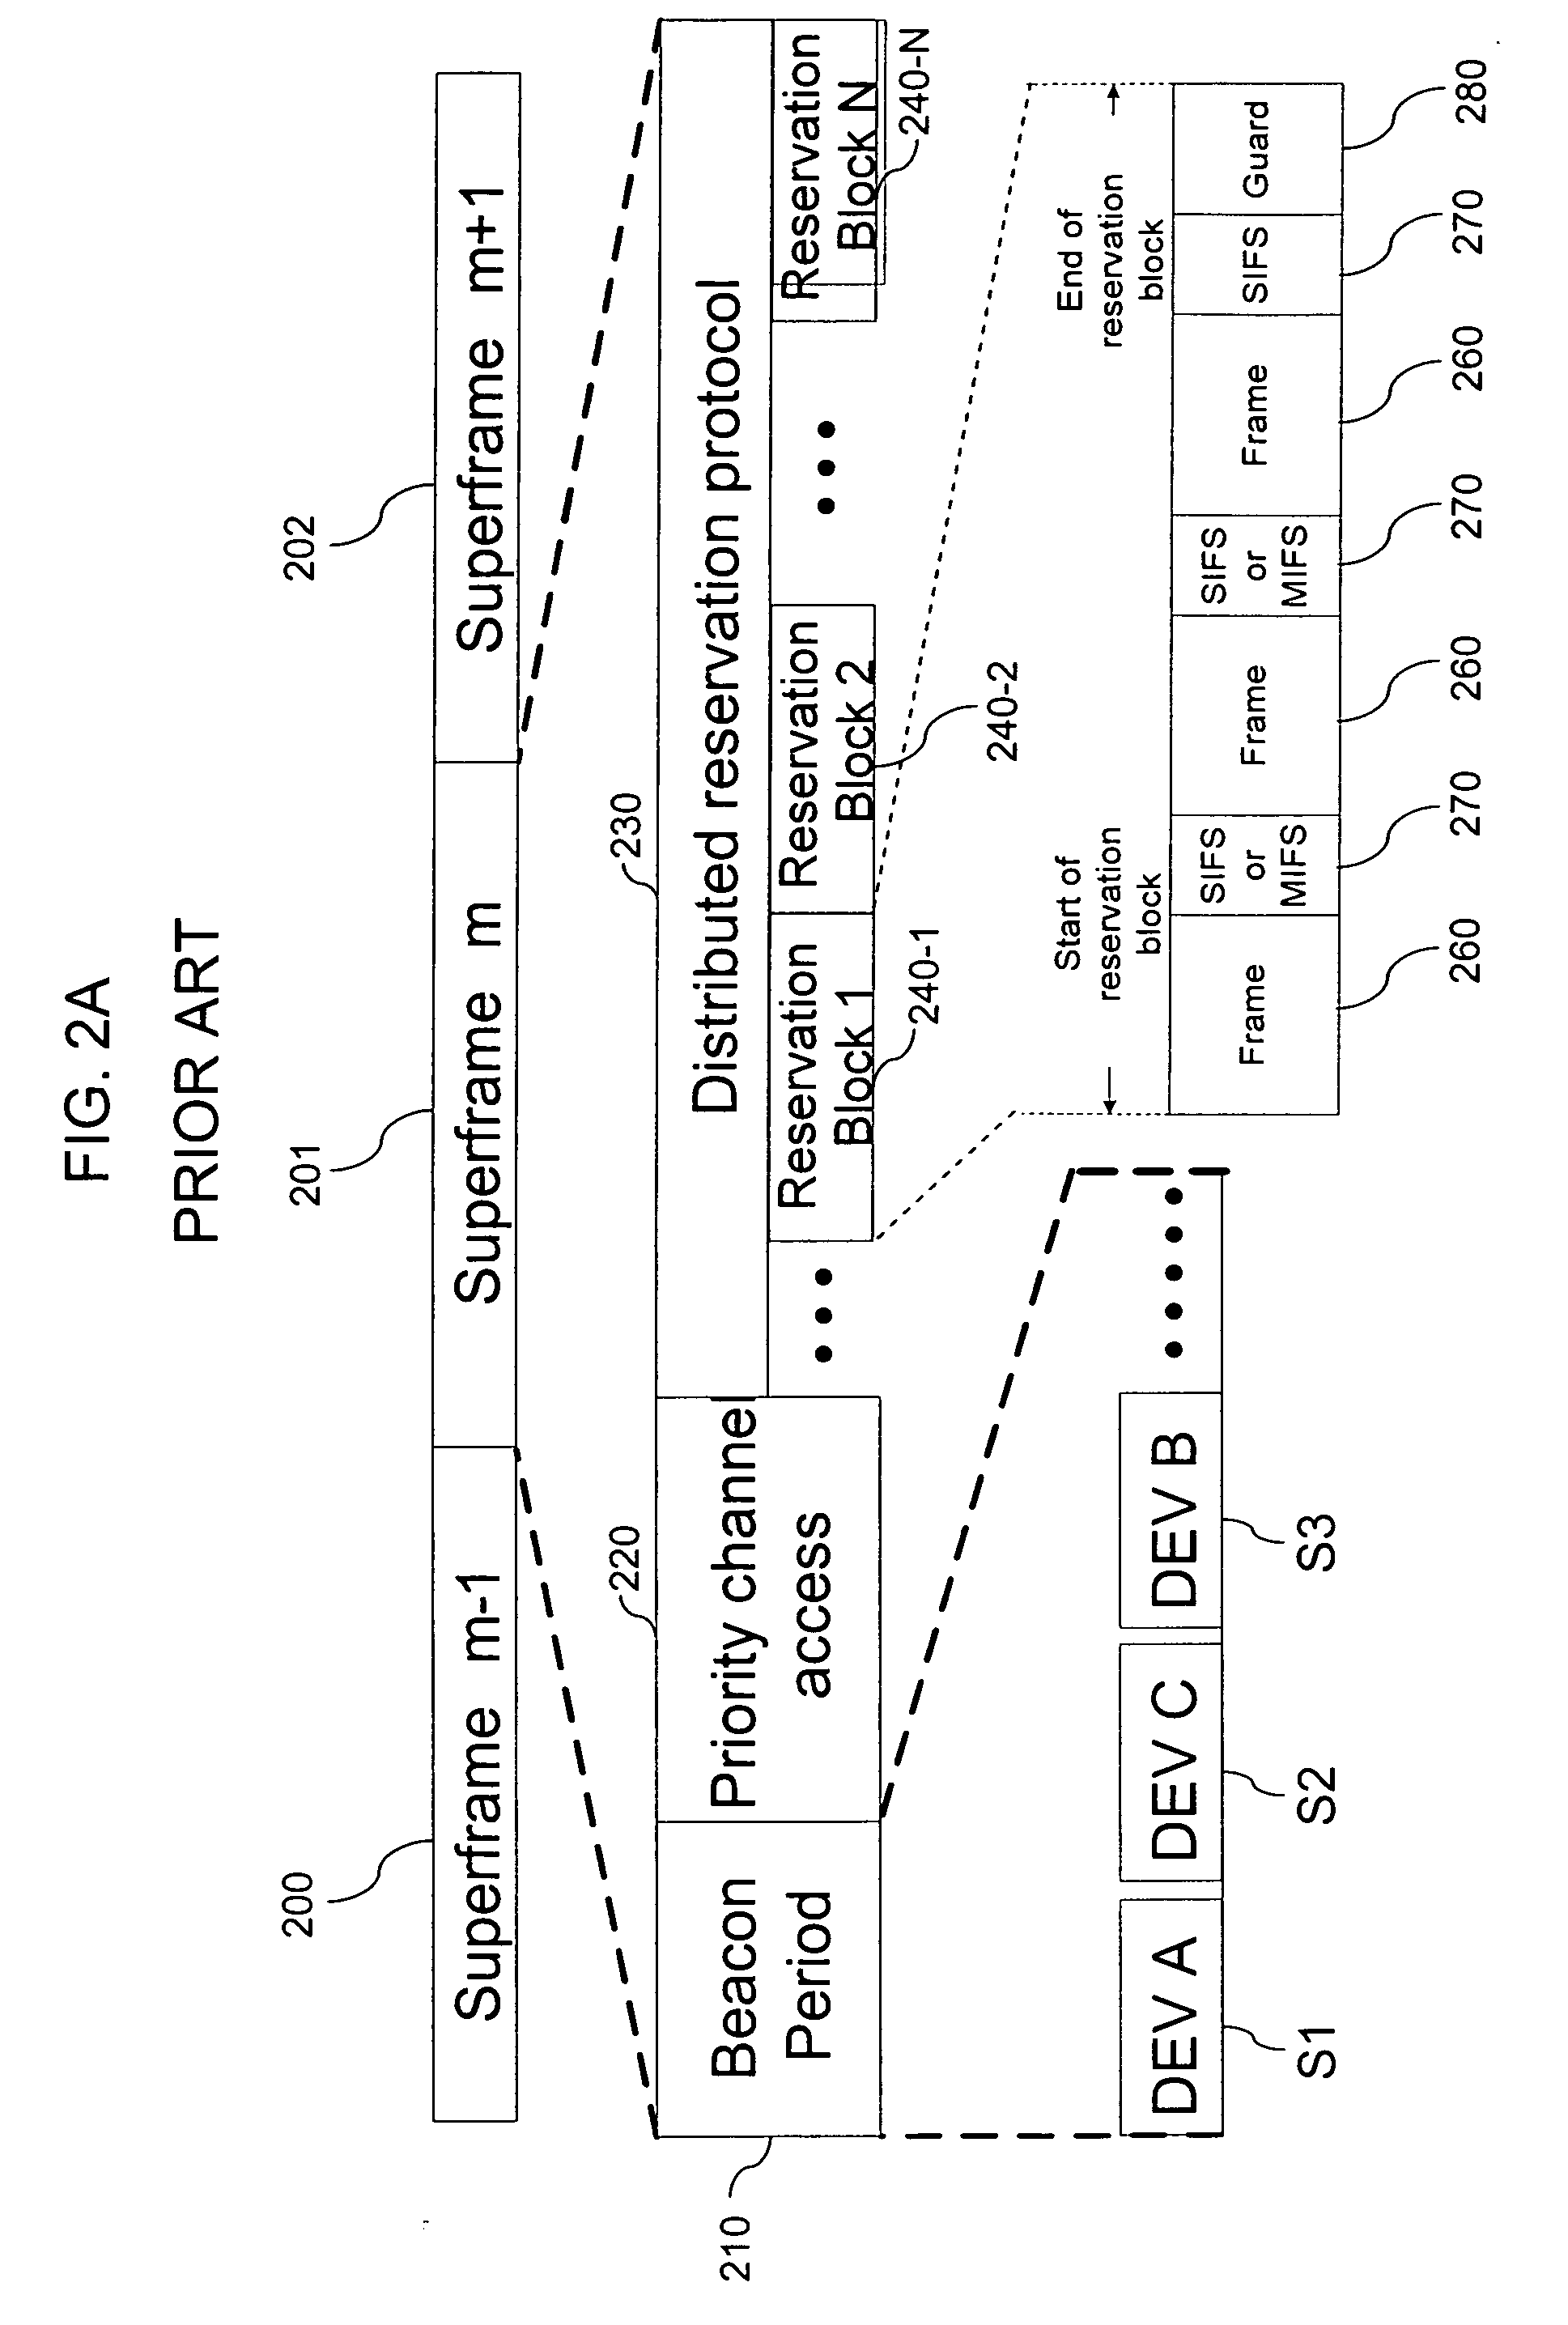 Method of band multiplexing to improve system capacity for a multi-band communication system